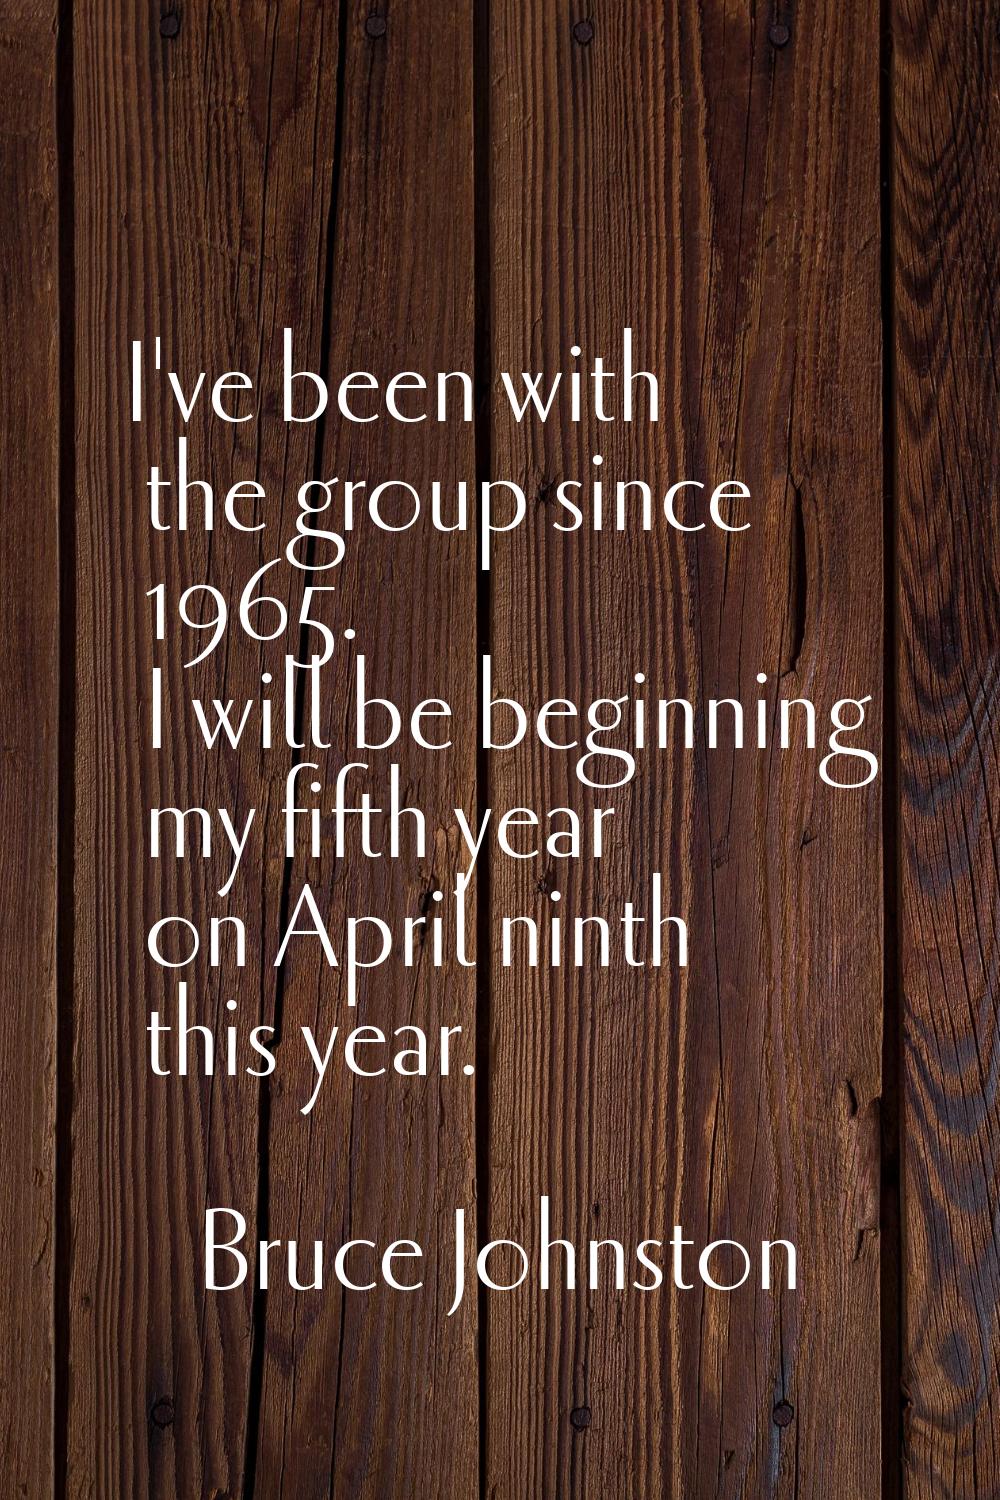 I've been with the group since 1965. I will be beginning my fifth year on April ninth this year.